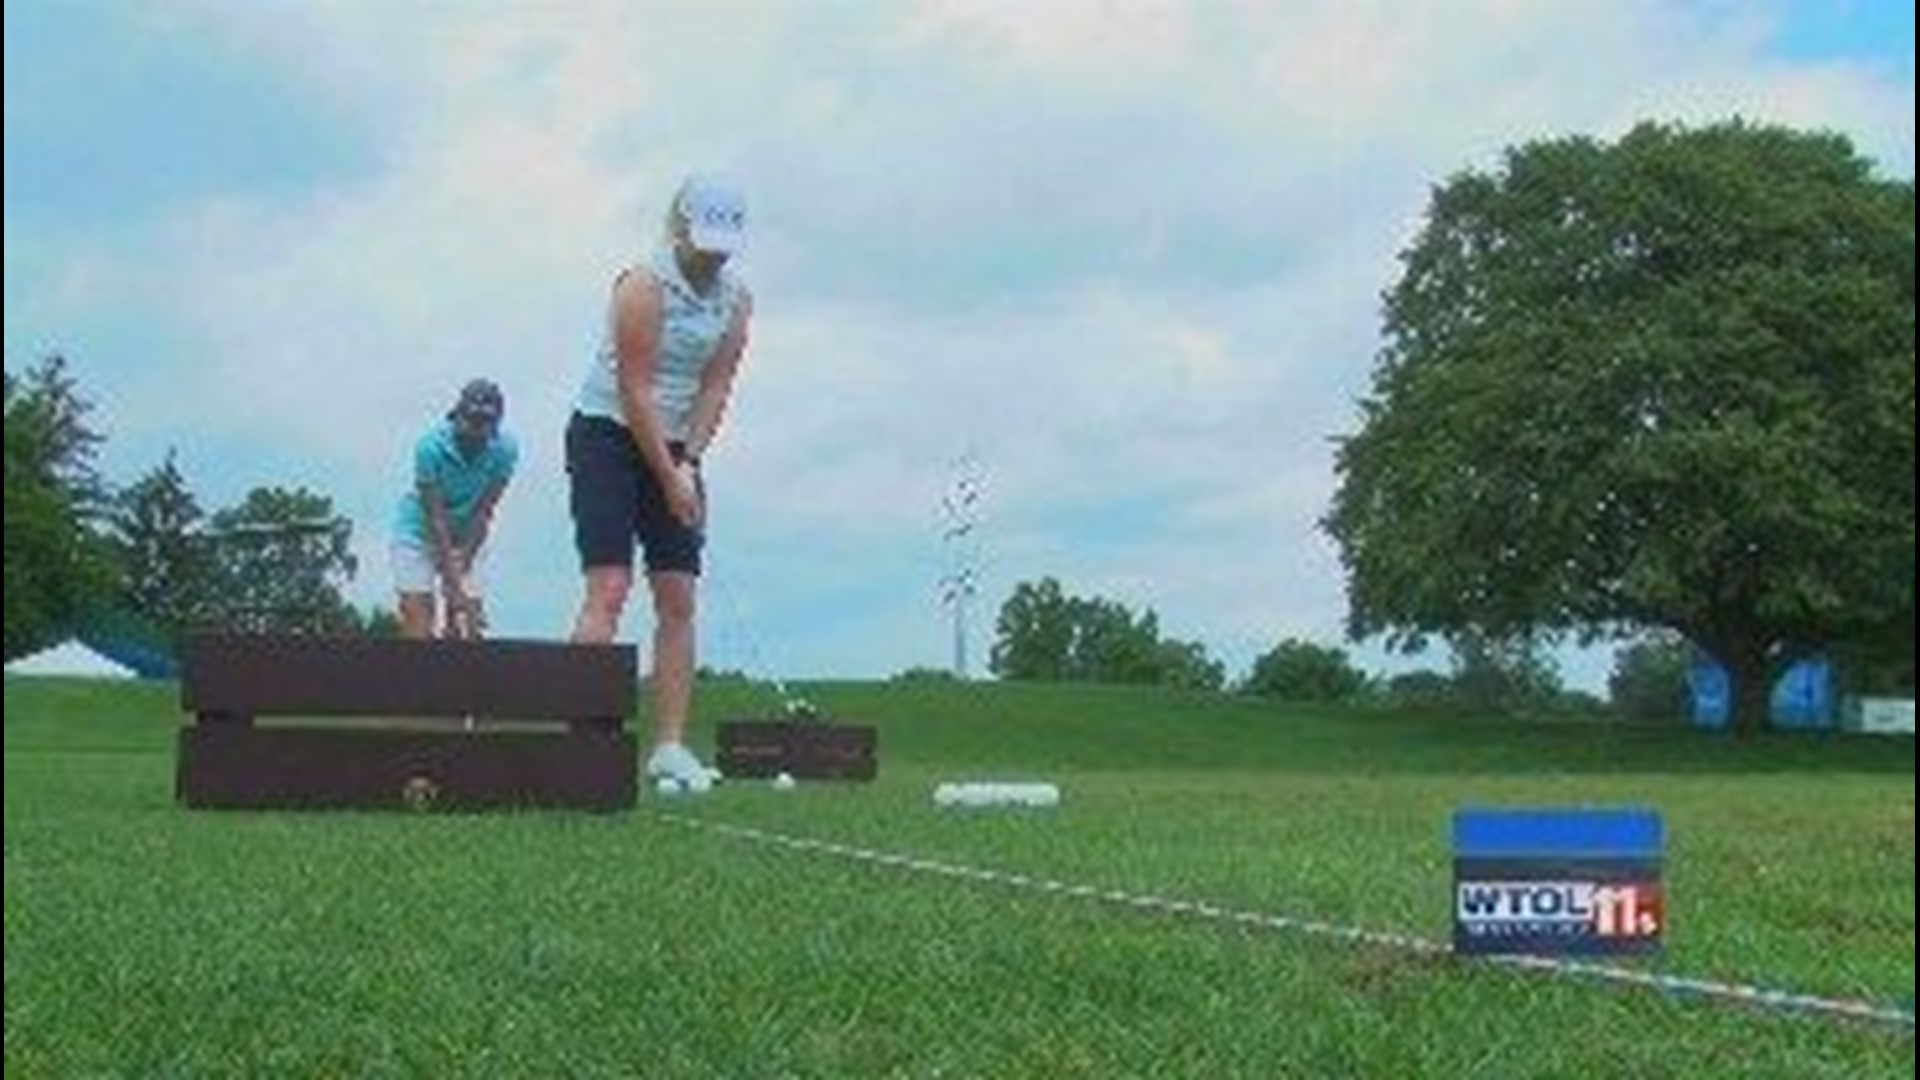 Two rookies check out Marathon Classic course before the tournament